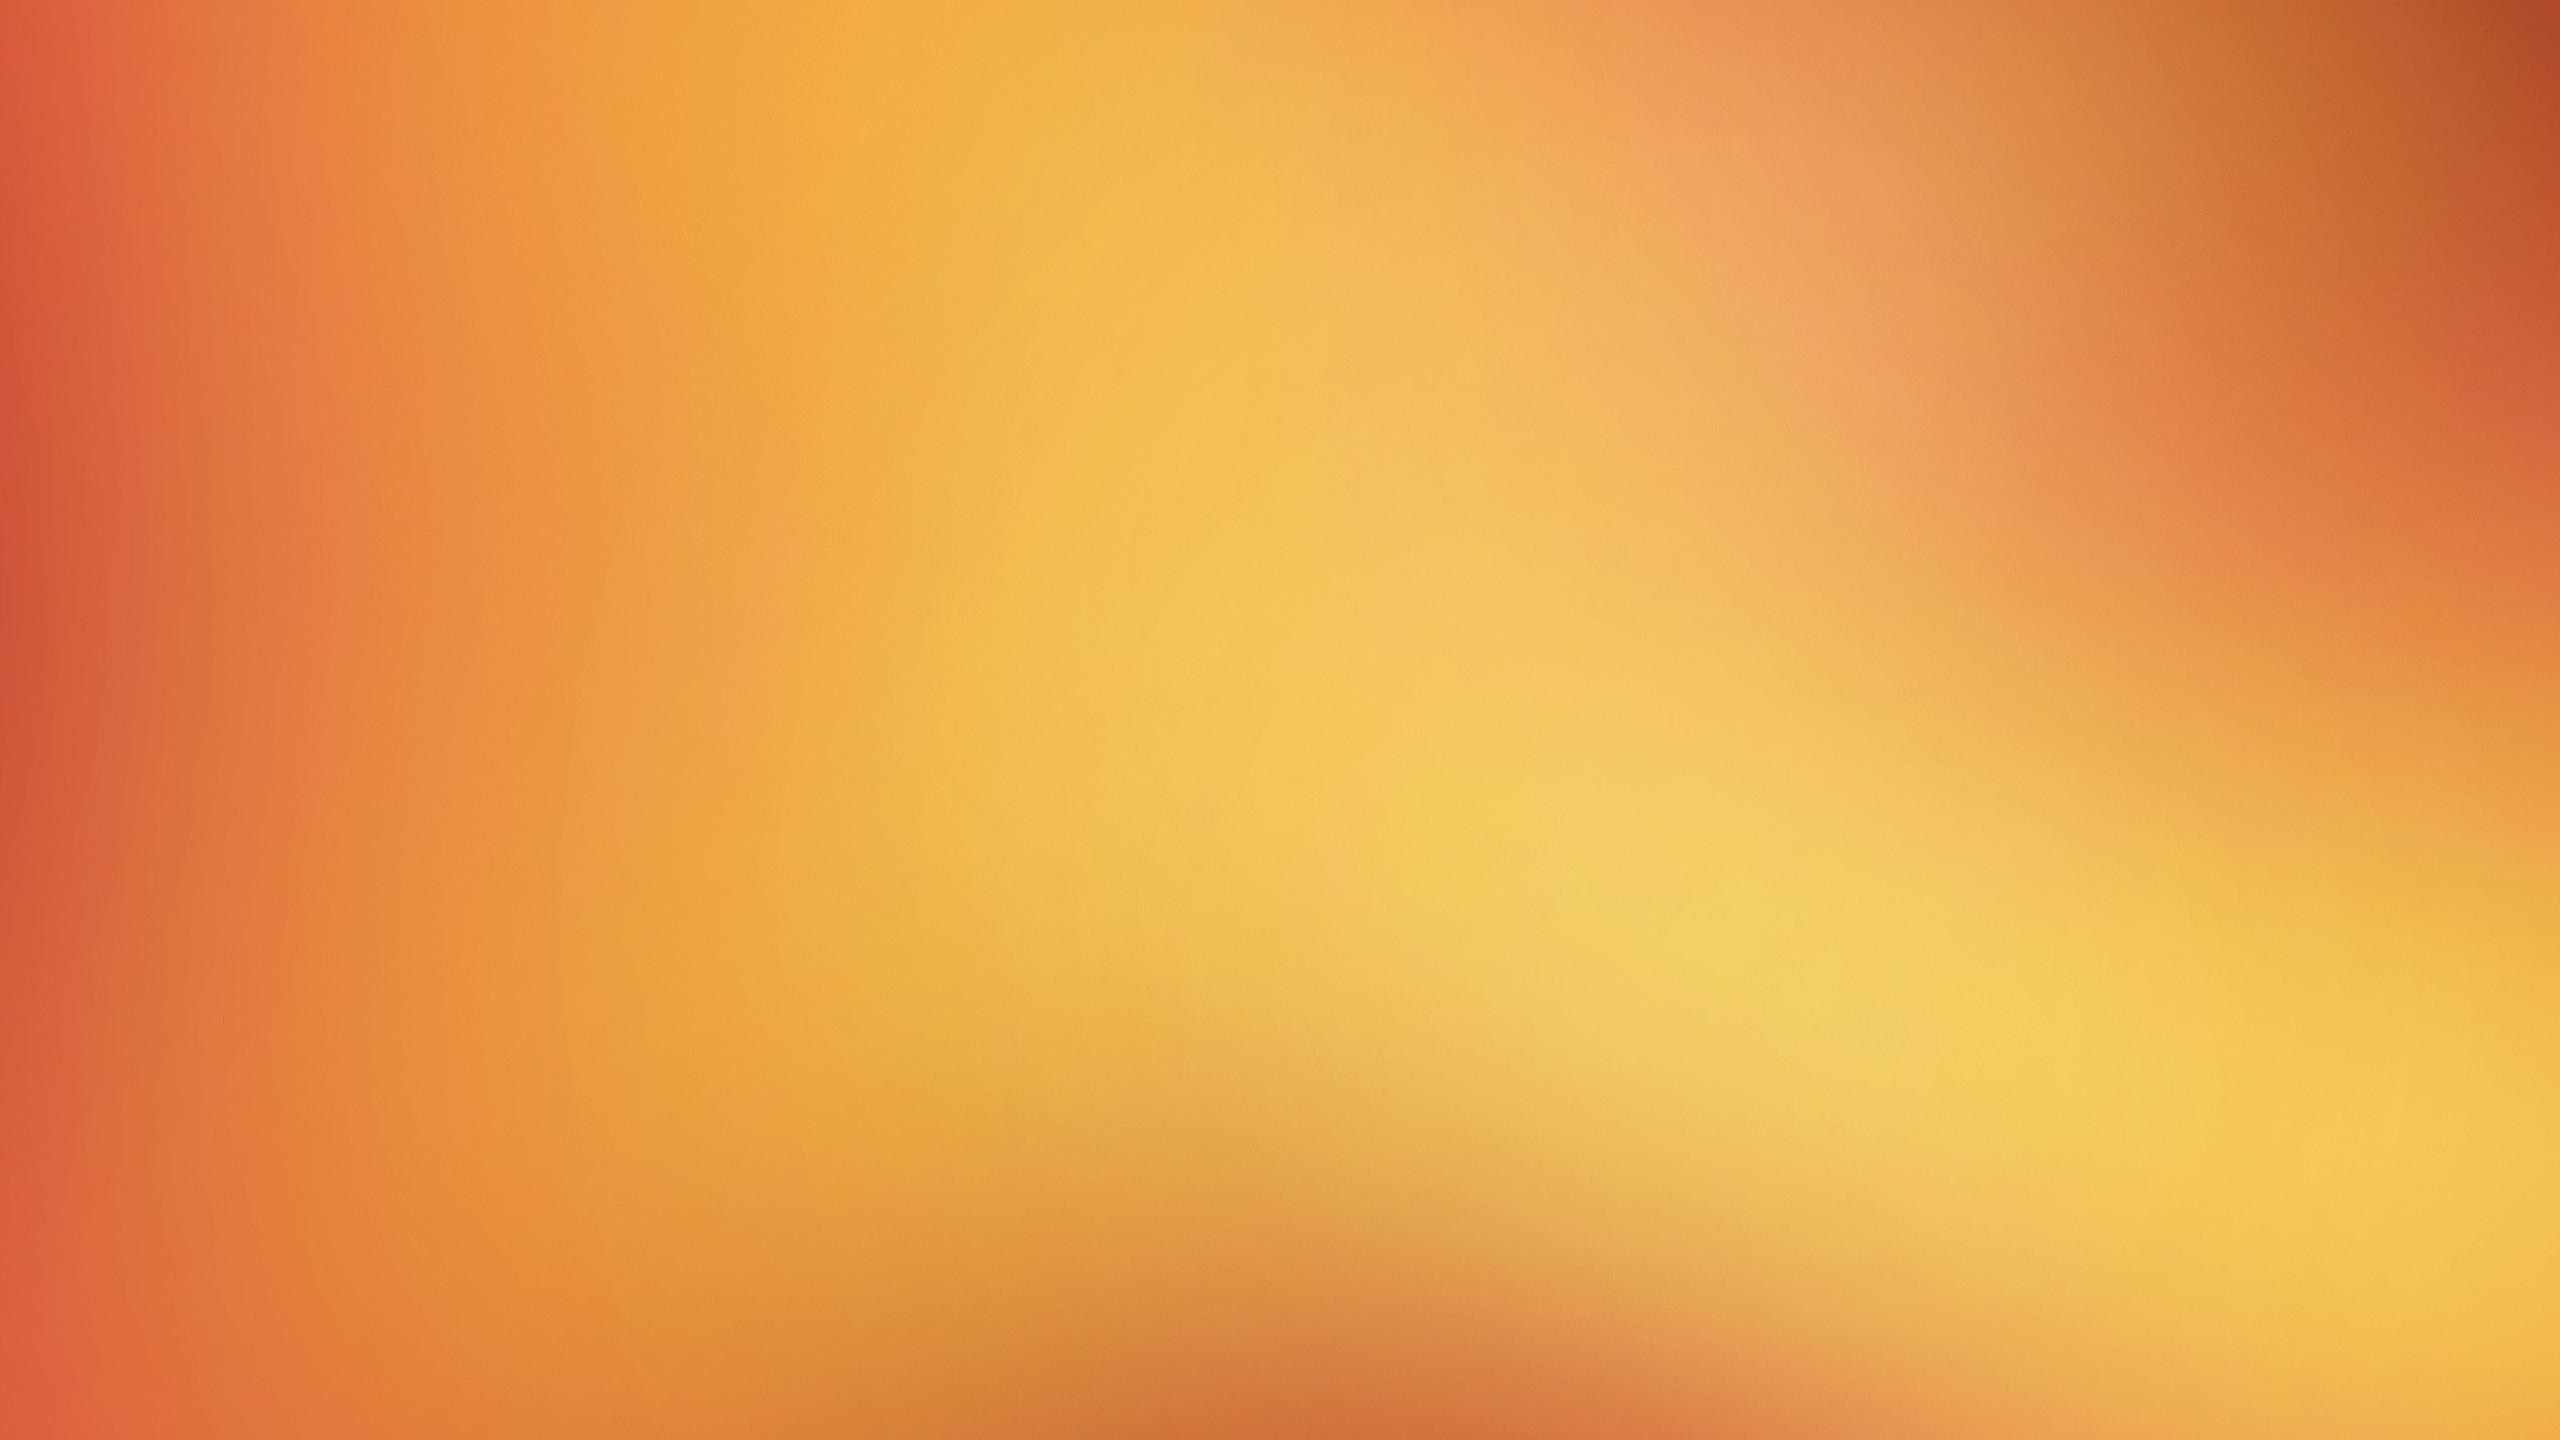 2560x1440 affordable free orange light wallpaper with plain light yellow background